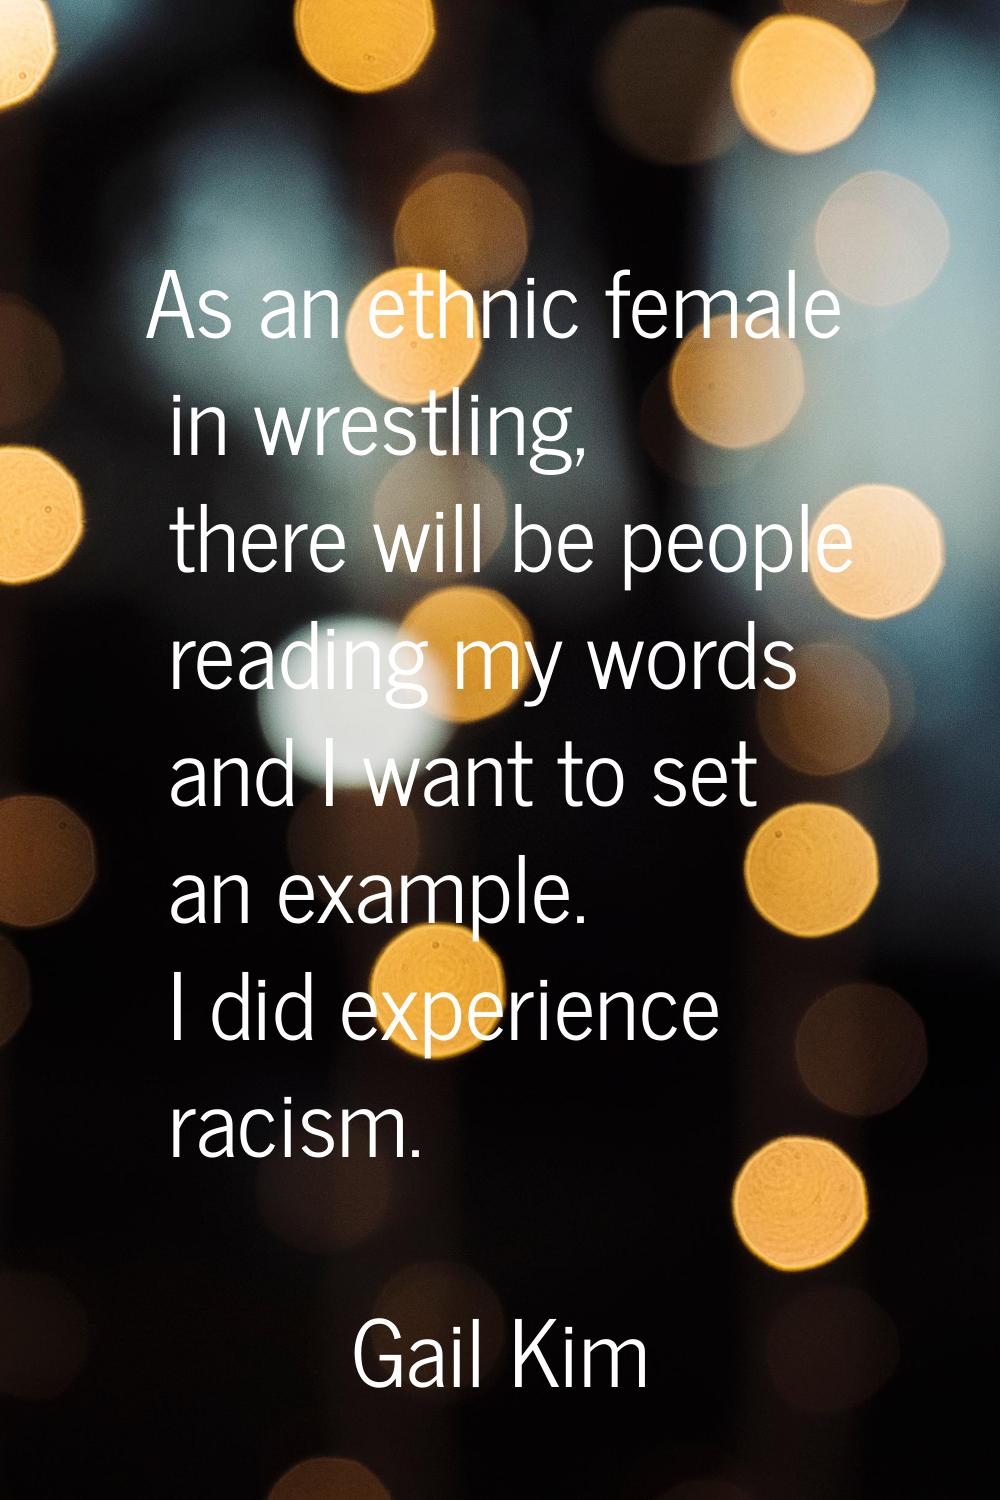 As an ethnic female in wrestling, there will be people reading my words and I want to set an exampl